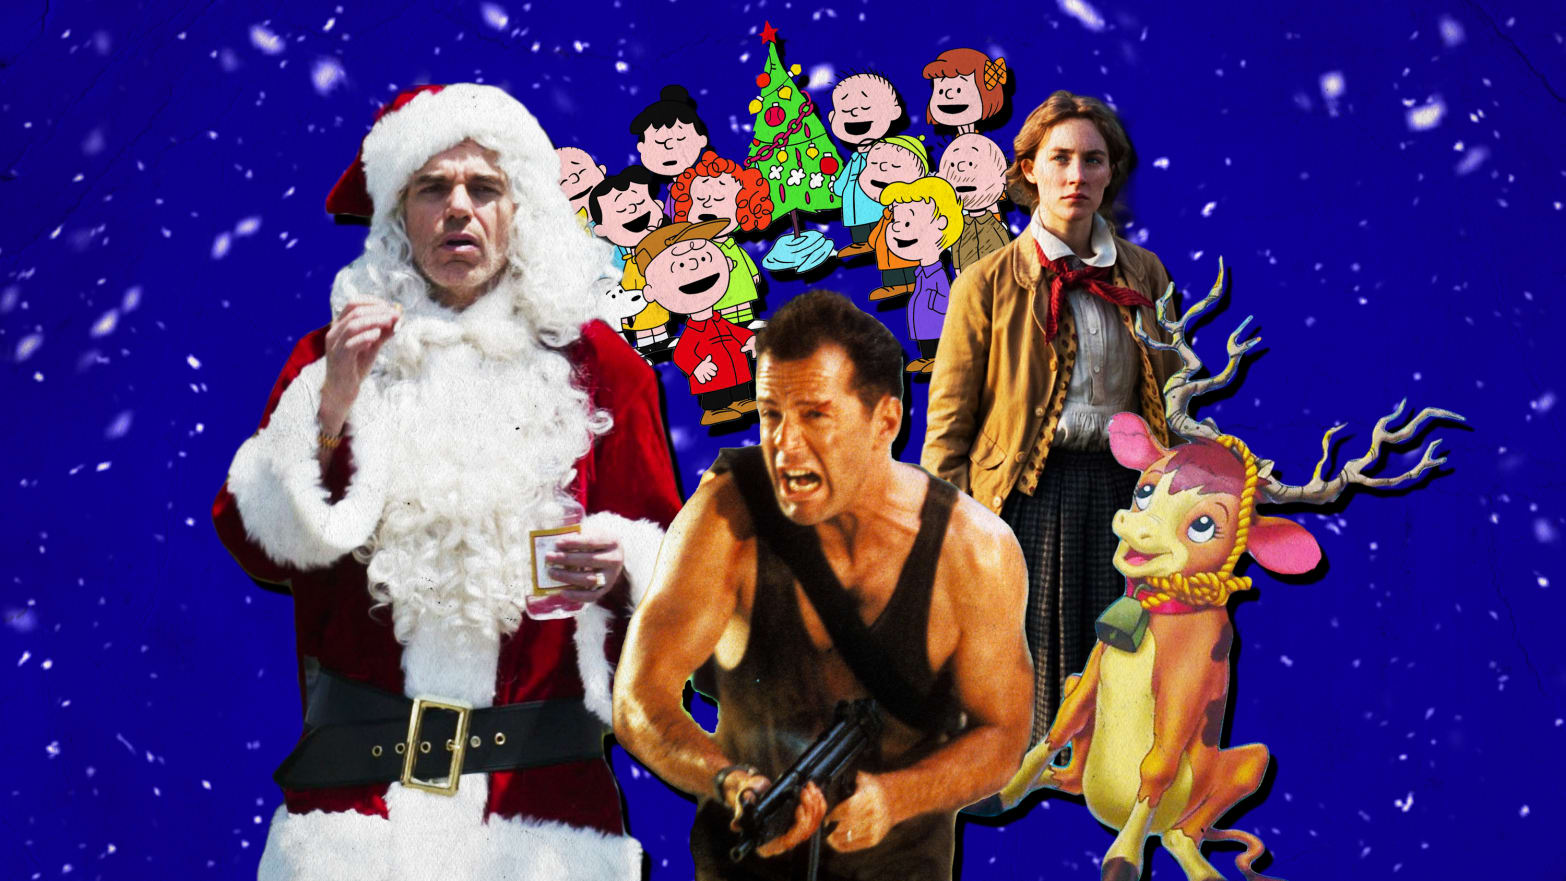 How the Grinch Stole Christmas: The Ultimate Edition - Movies on Google Play